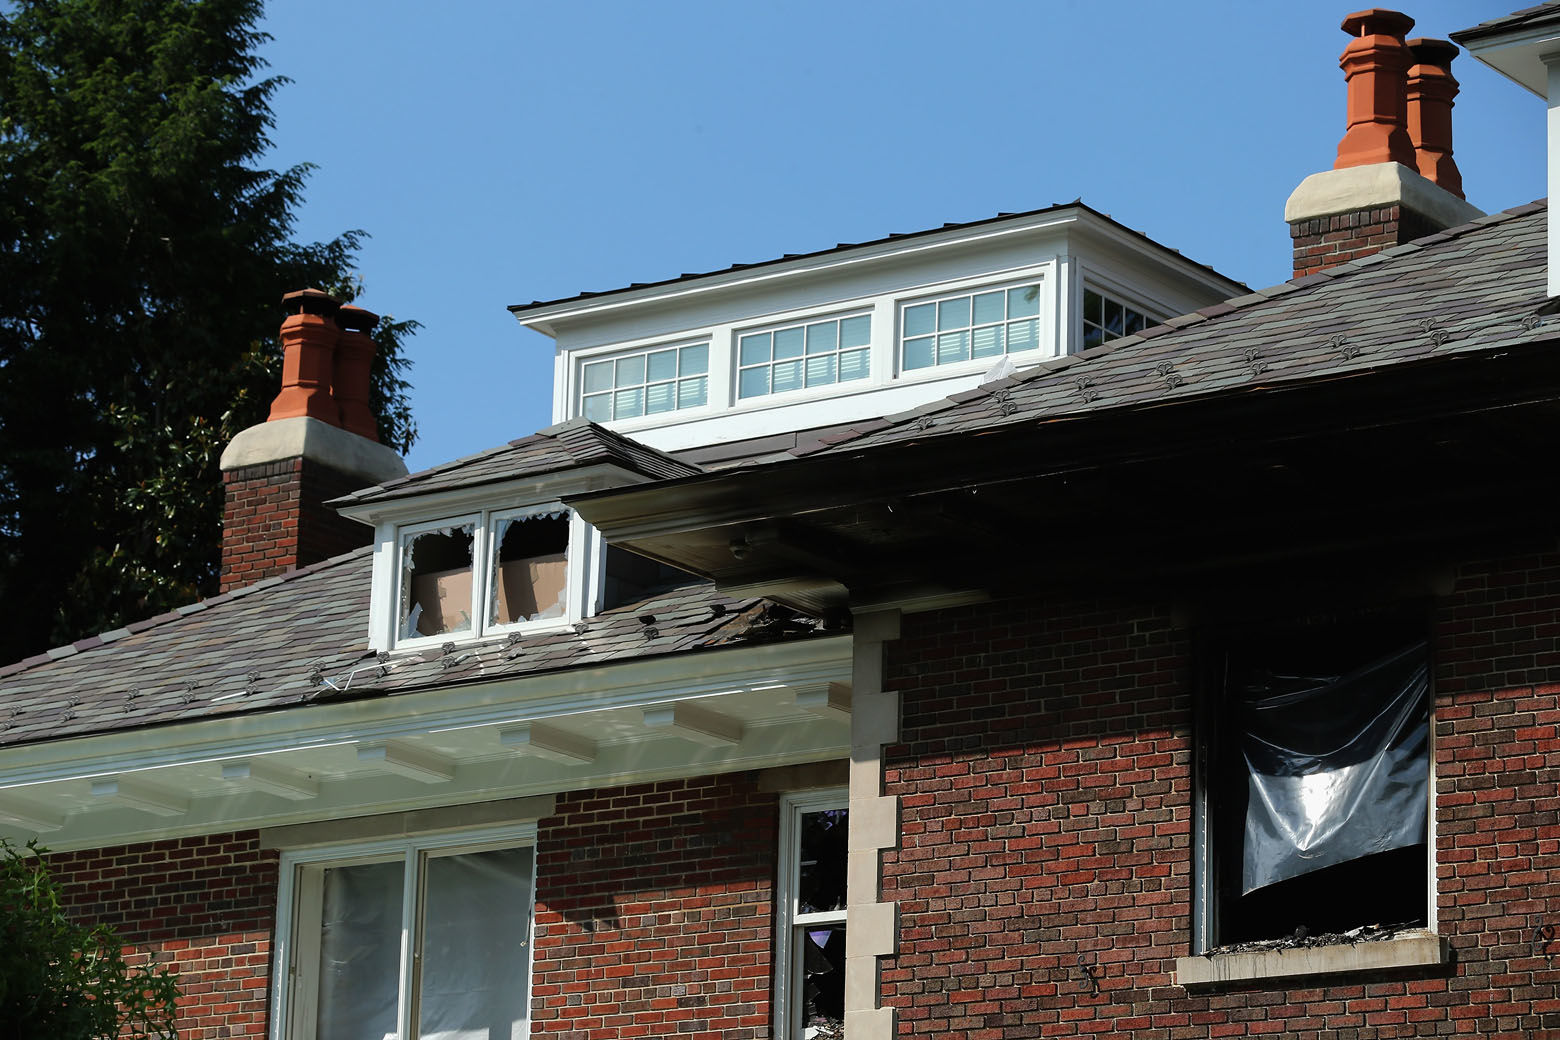 WASHINGTON, DC - MAY 19:  Smashed windows and heavy fire damage scar a house on the 3200 block of Woodland Drive NW May 19, 2015 in Washington, DC. Firefighters discovered the bodies of Savvas Savopoulos, 46, his wife Amy, 47, their 10-year-old son Philip, and the housekeeper, Veralicia Figueroa, 57, last Thursday afternoon when they responded to a blaze at the house. Two Savopoulos daughters were away in boarding school at the time. Investigators have ruled the deaths homicides and say they could continue to collect evidence at the house for another week.  (Photo by Chip Somodevilla/Getty Images)